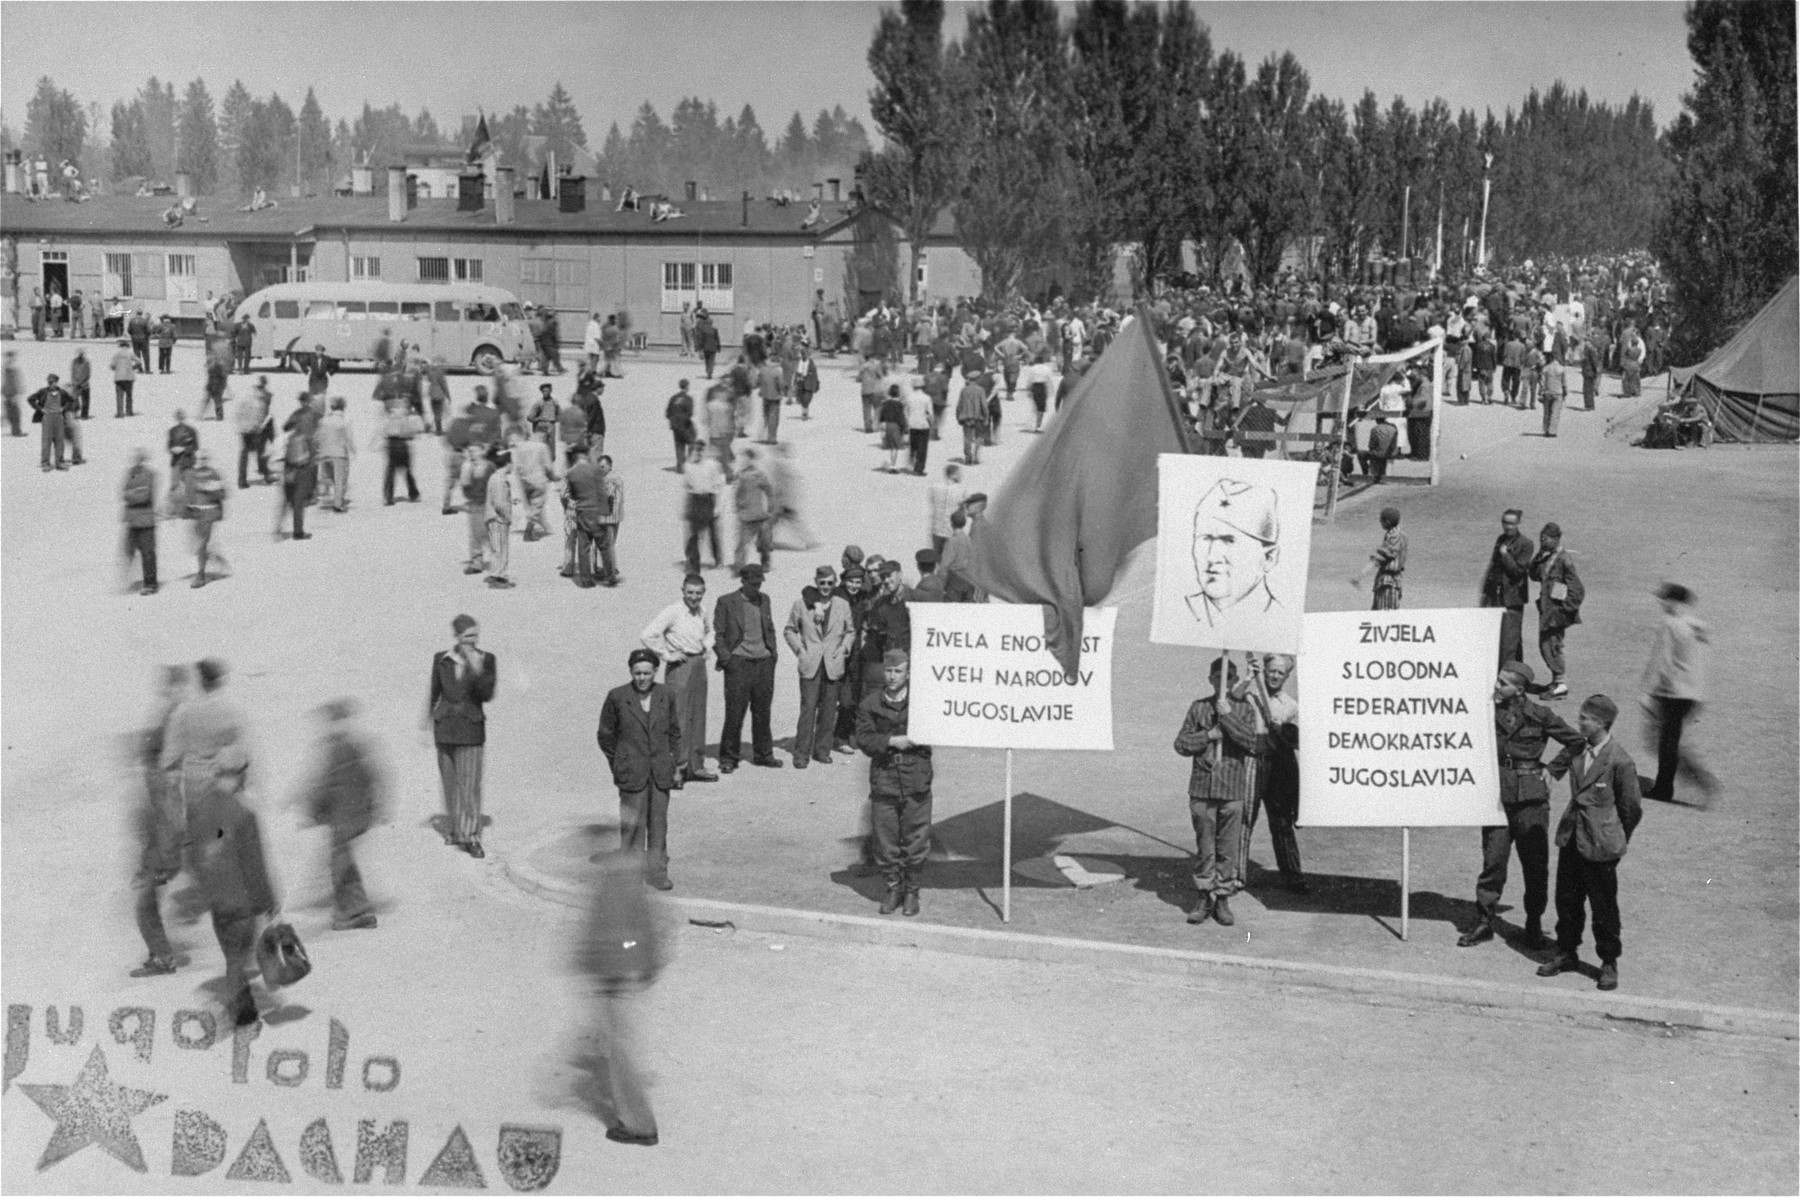 Yugoslavian survivors honoring Tito and the Yugoslav resistance during a gathering to salute the Allies and remember comrades who perished in Dachau.